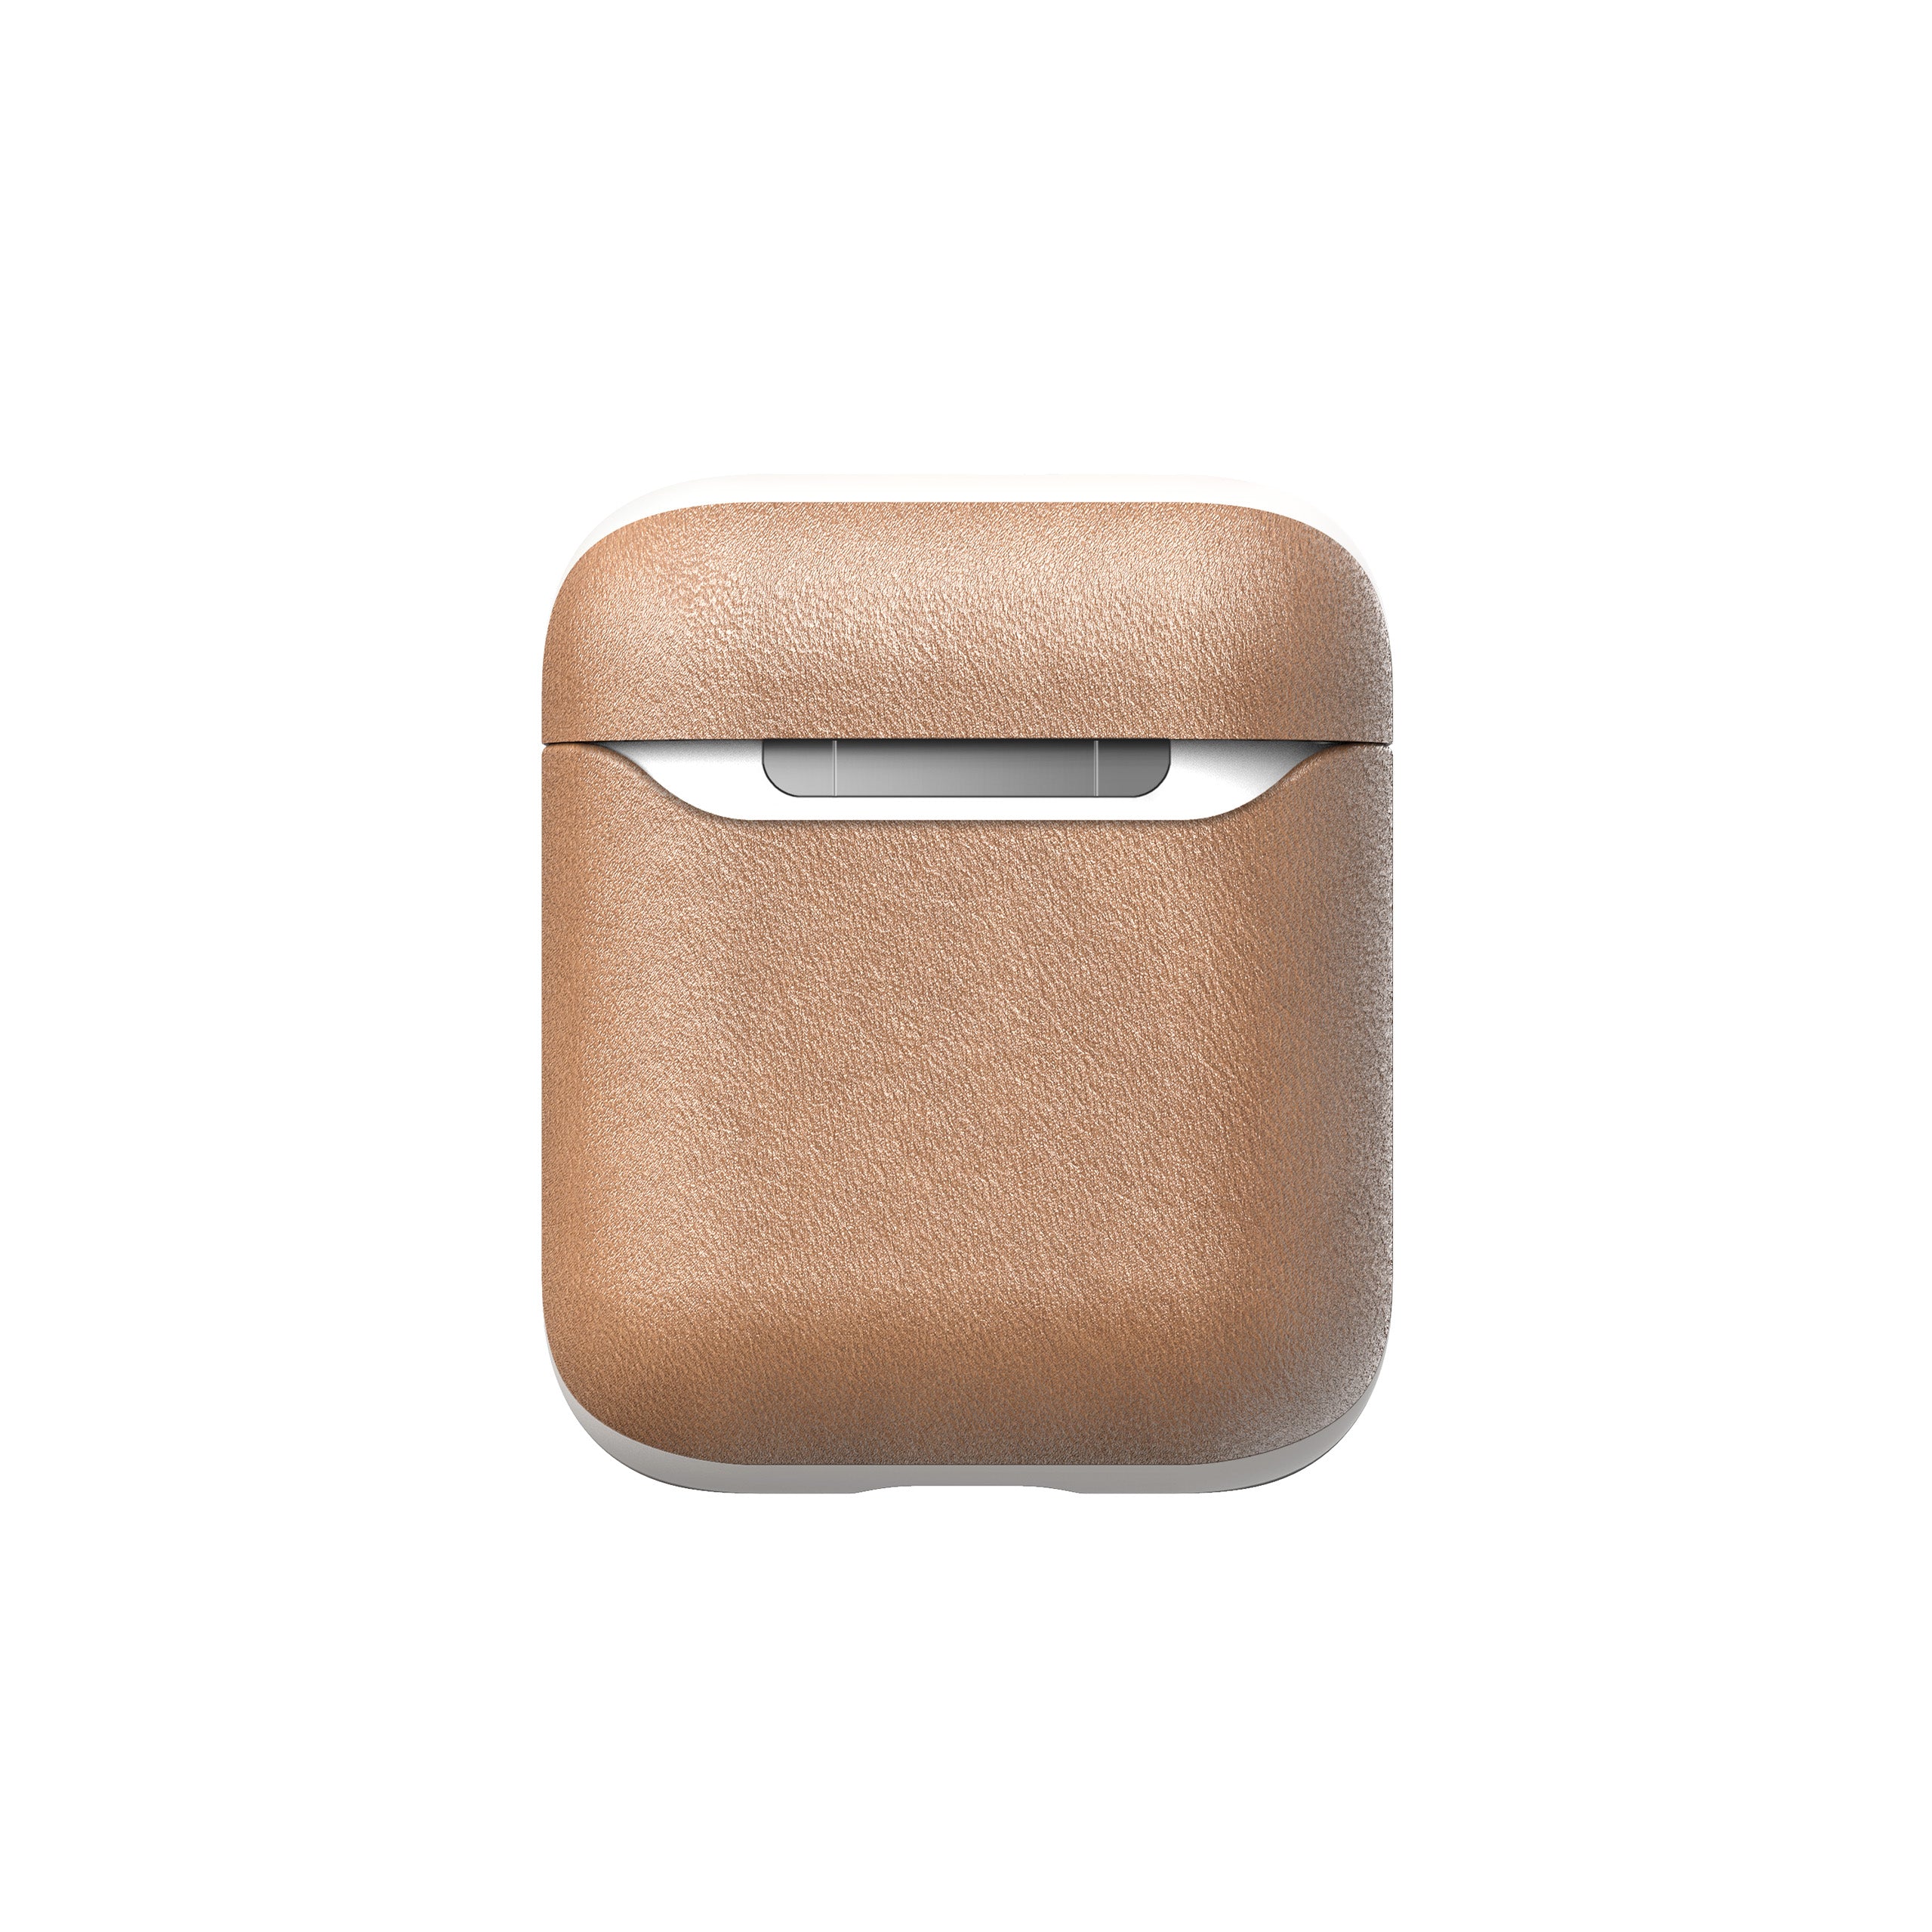 AirPods Case - Natural